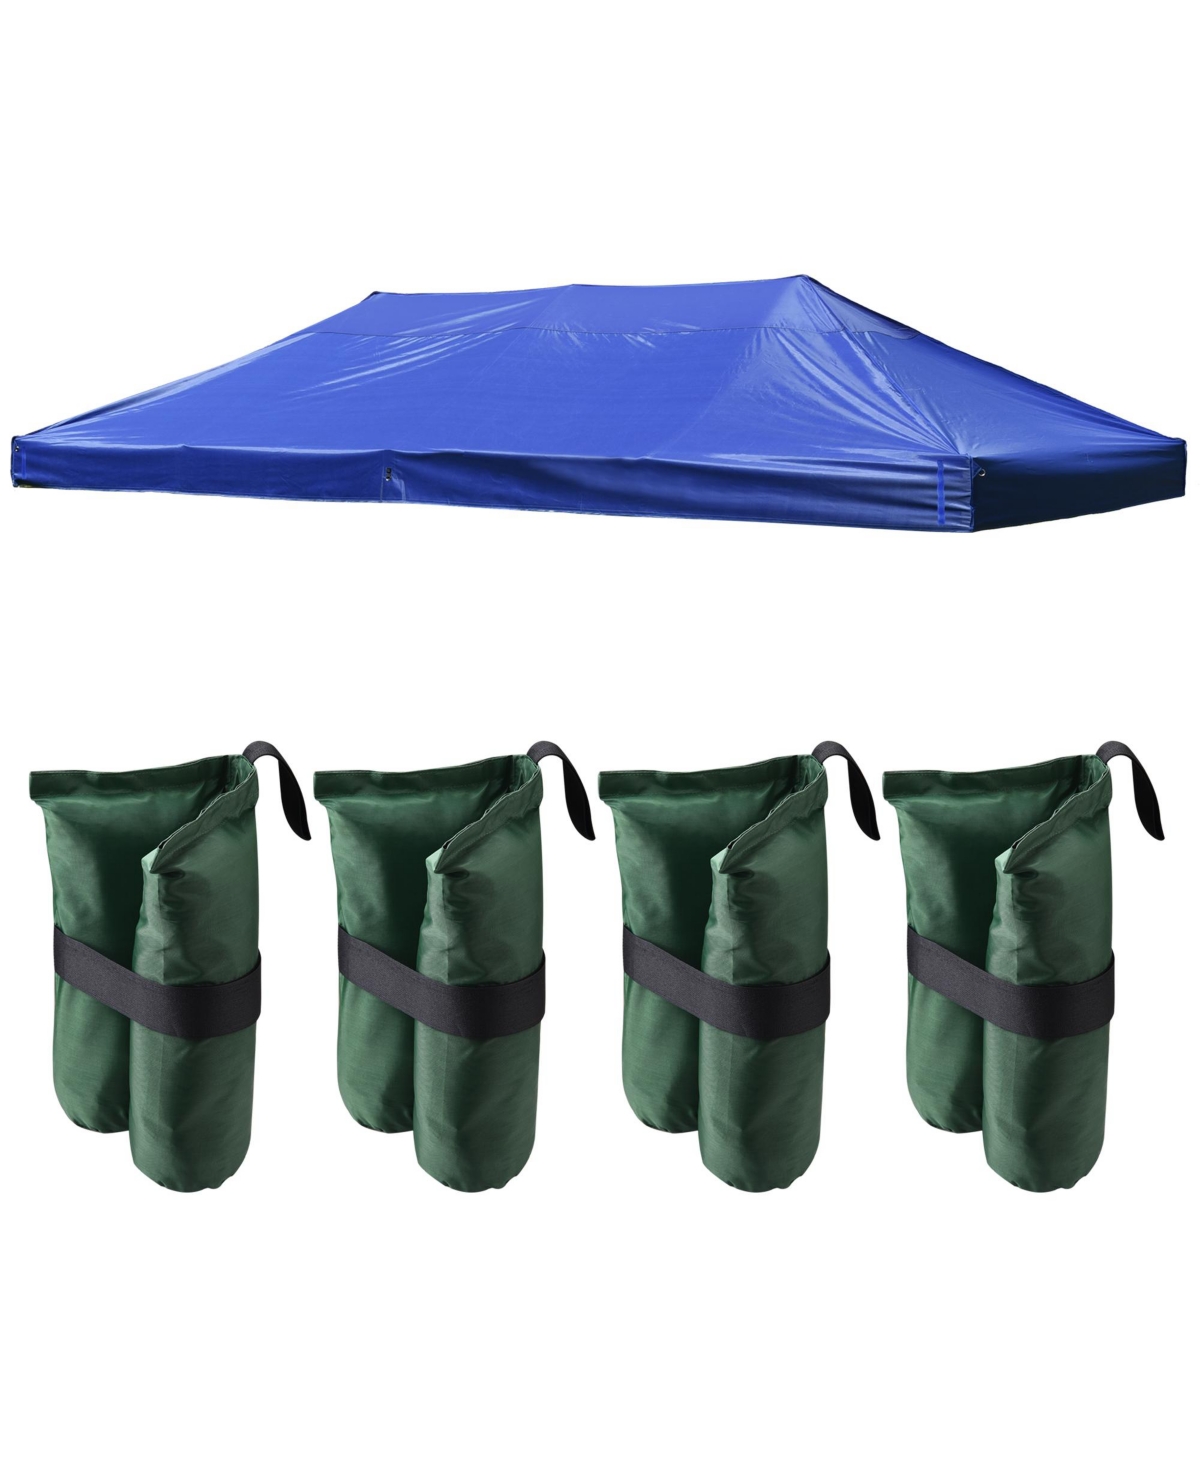 InstaHibit 10x20 Ft Pop up Canopy Top with 4 Sand Weight Bags Beach Camping Yard - Blue